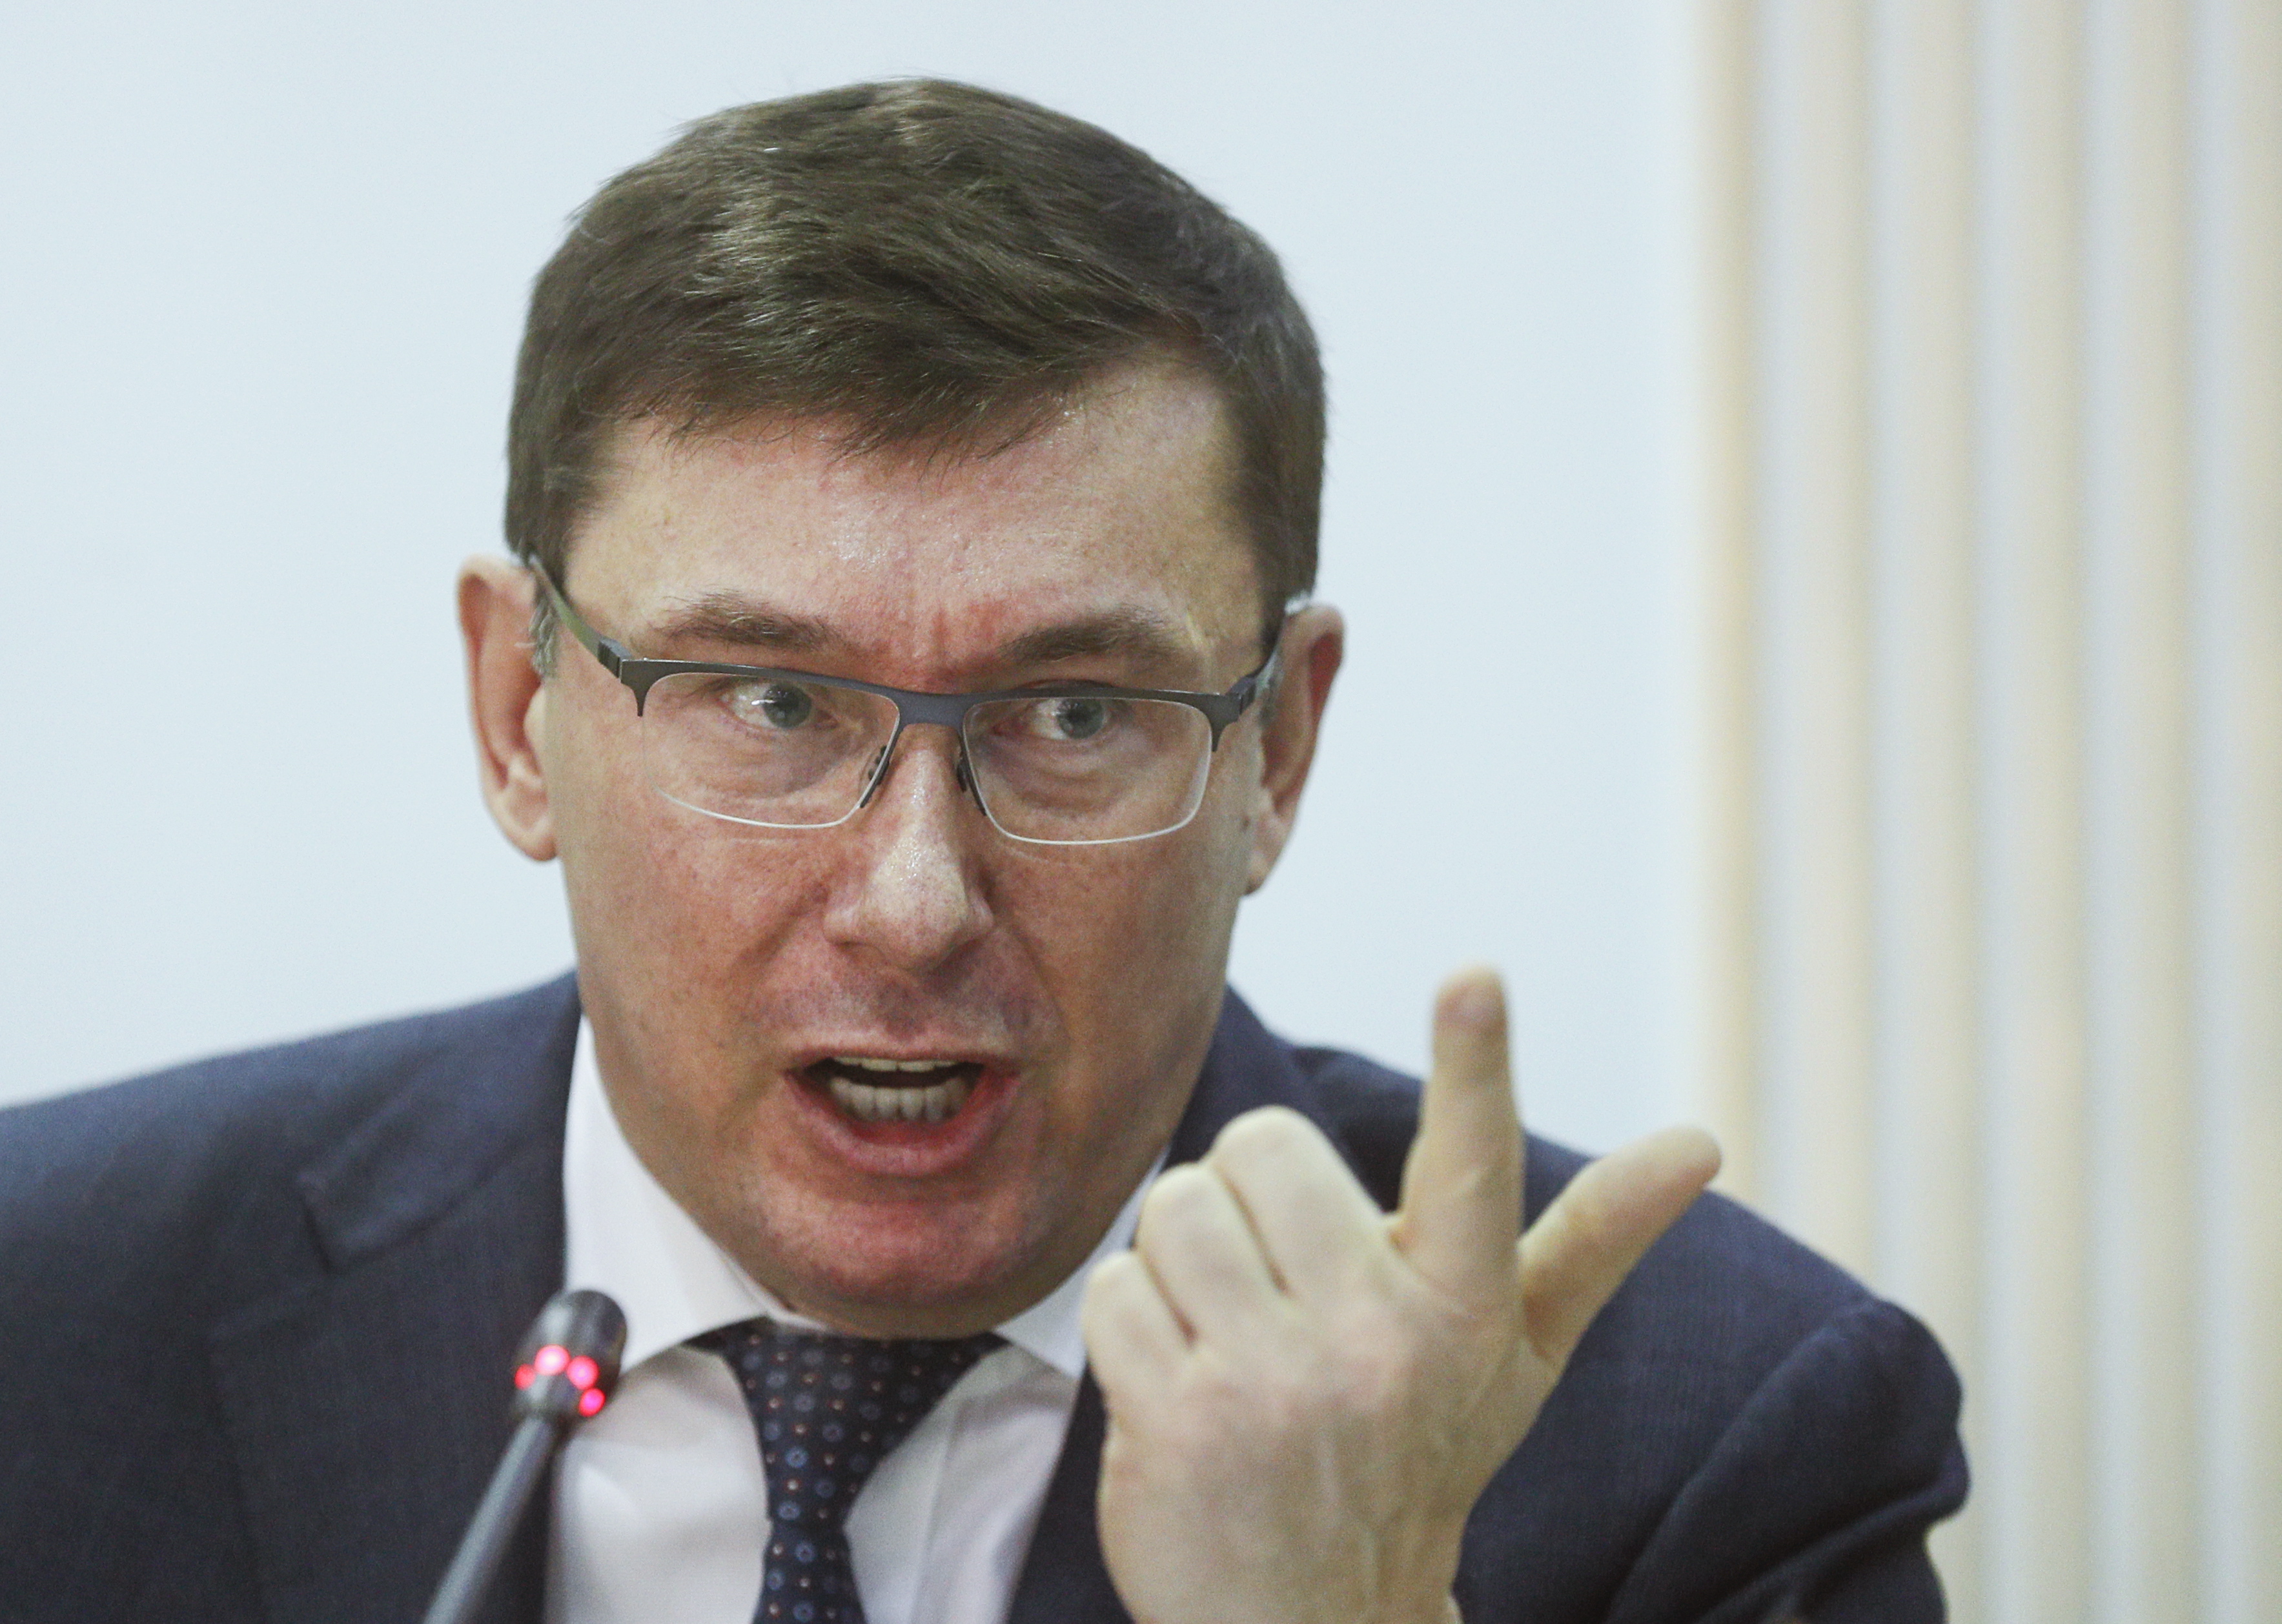 epa07872965 (FILE) - Yuriy Lutsenko, then Prosecutor General of Ukraine reacts during a joint briefing at the Central Election Committee office in Kiev, Ukraine, 12 March 2019 (reissued 27 September 2019). Meetings between Lutsenko and US President Trump's lawyer Rudy Giuliani are mentioned in a whistleblower's complaint over Trump's dealings with Ukraine. The whistleblower alleges that Trump had demanded Ukrainian investigations into US Presidential candidate Joe Biden and his son Hunter Biden's business involvement in Ukraine. *** Local Caption *** 55048052  EPA/SERGEY DOLZHENKO *** Local Caption *** 55048052